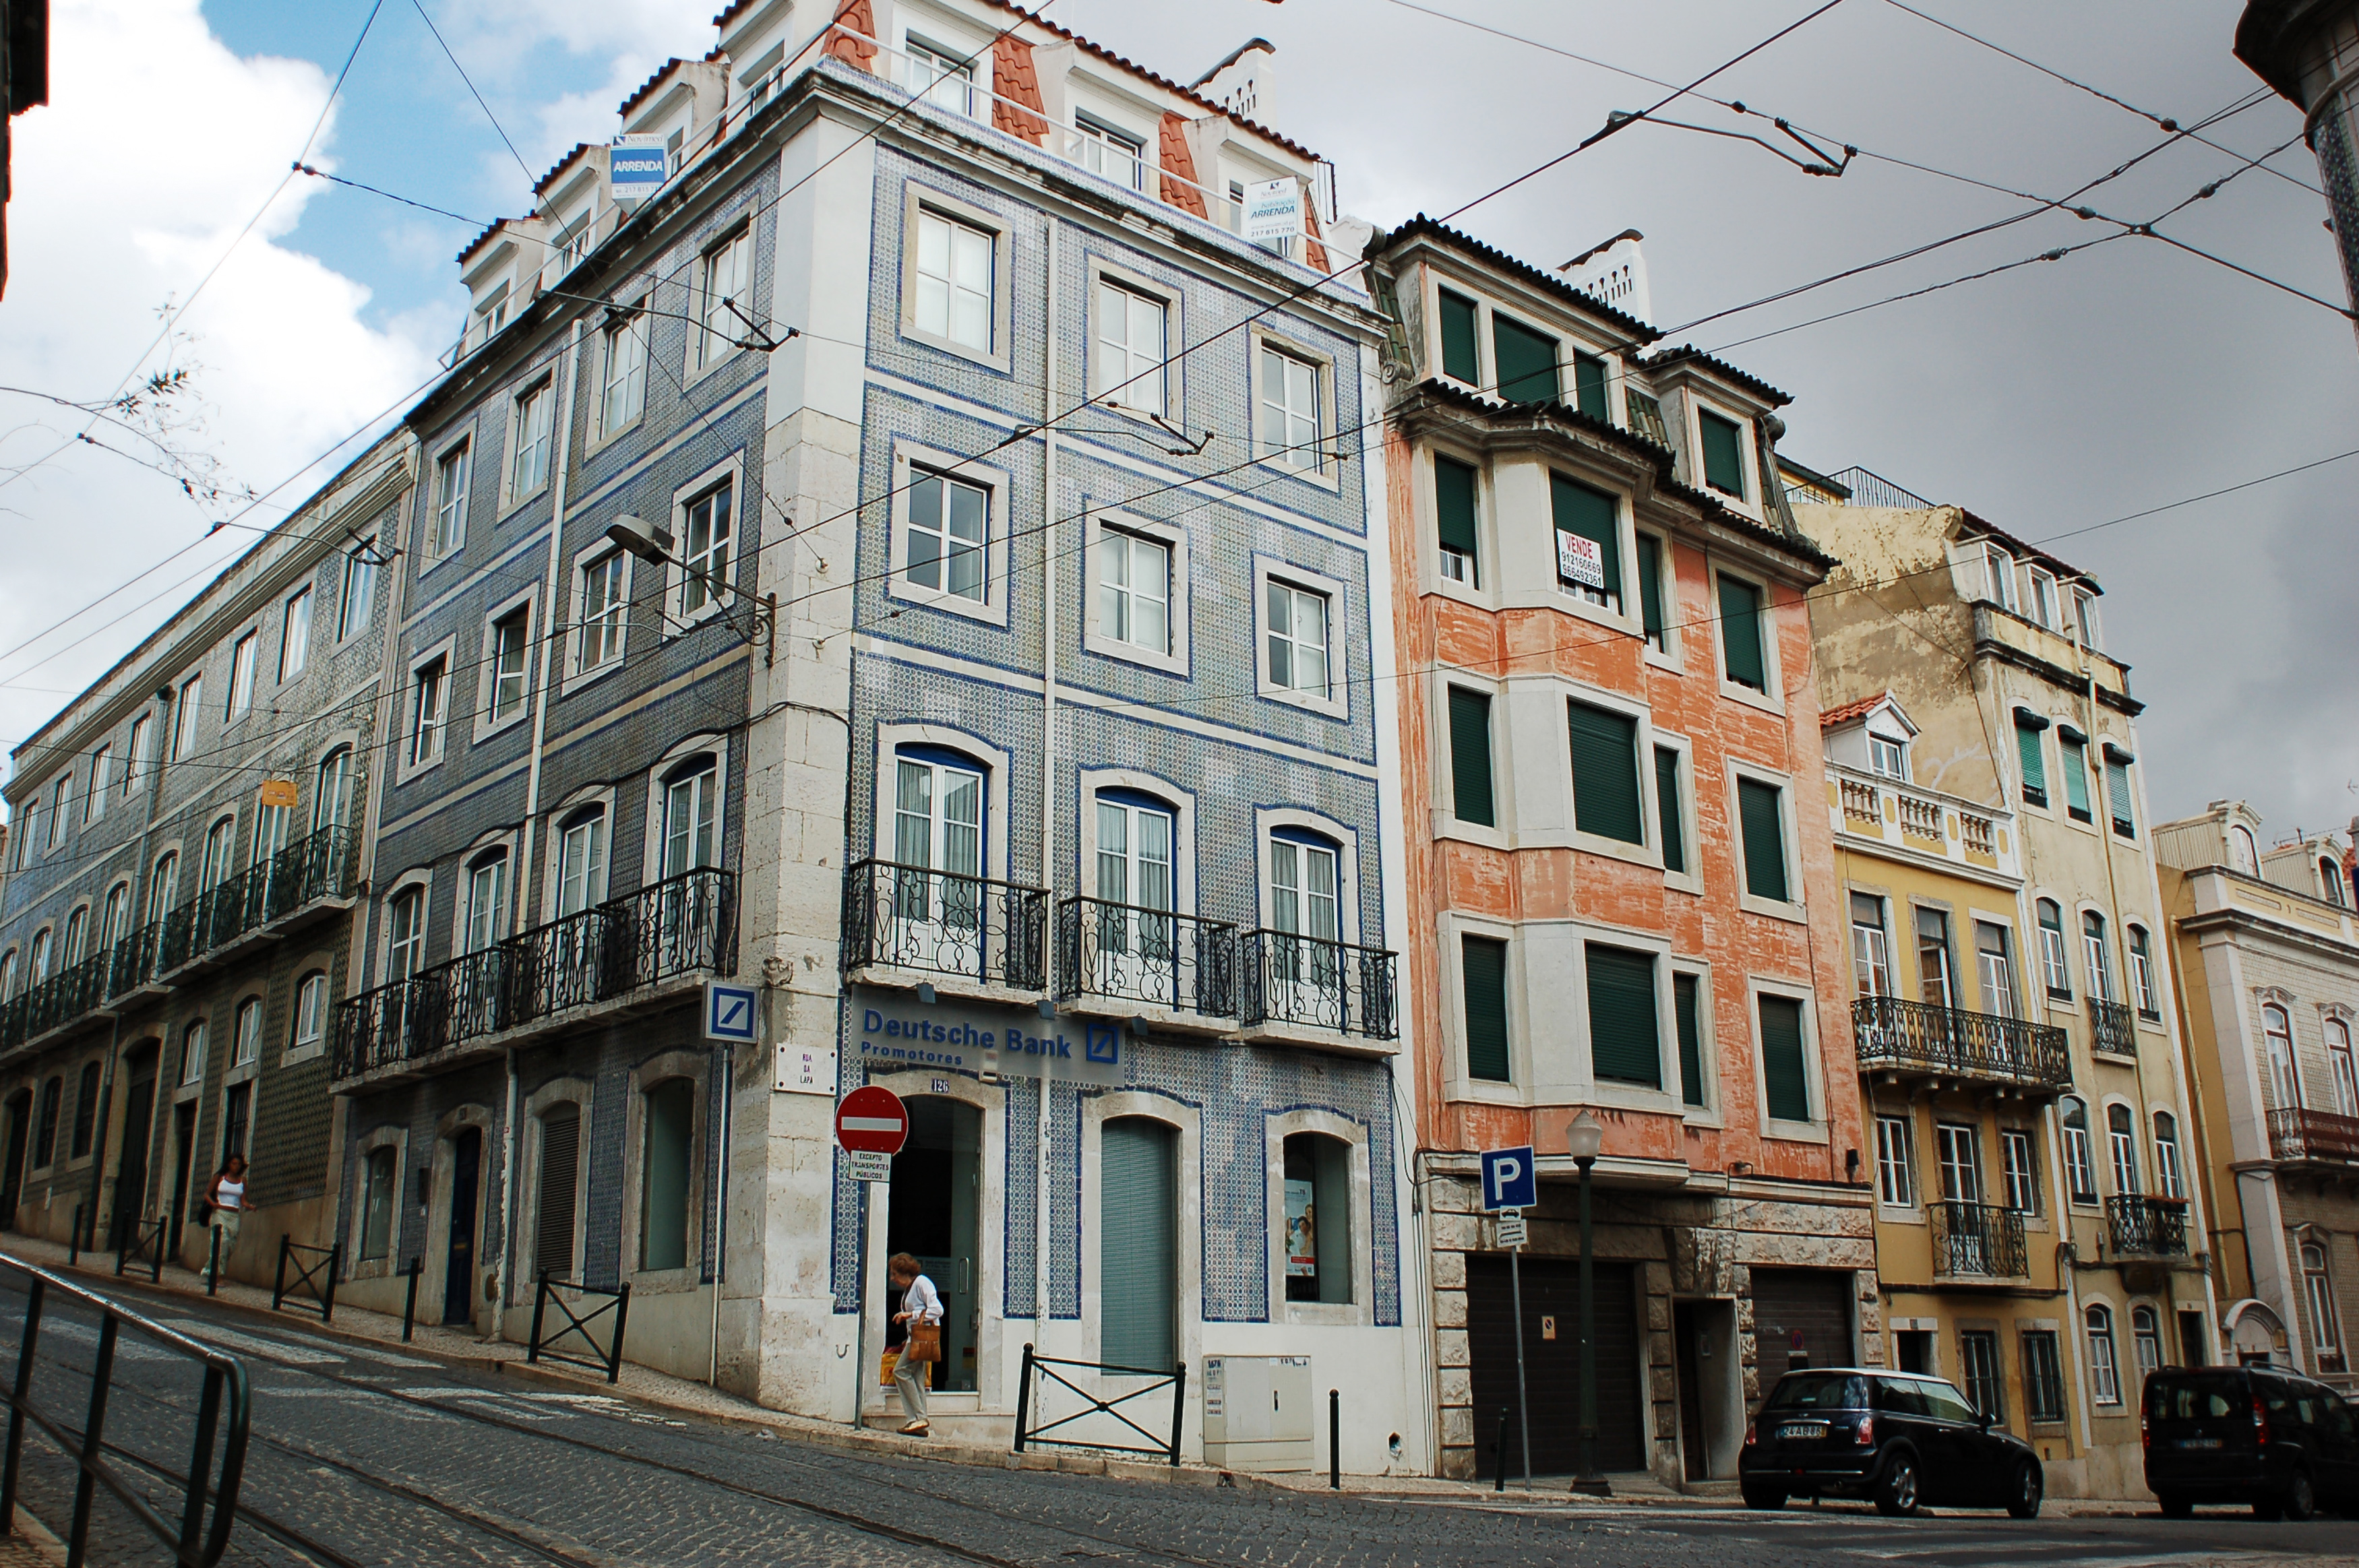 File:Architecture of Lisbon streets, pattern. Portugal, Southwestern ...